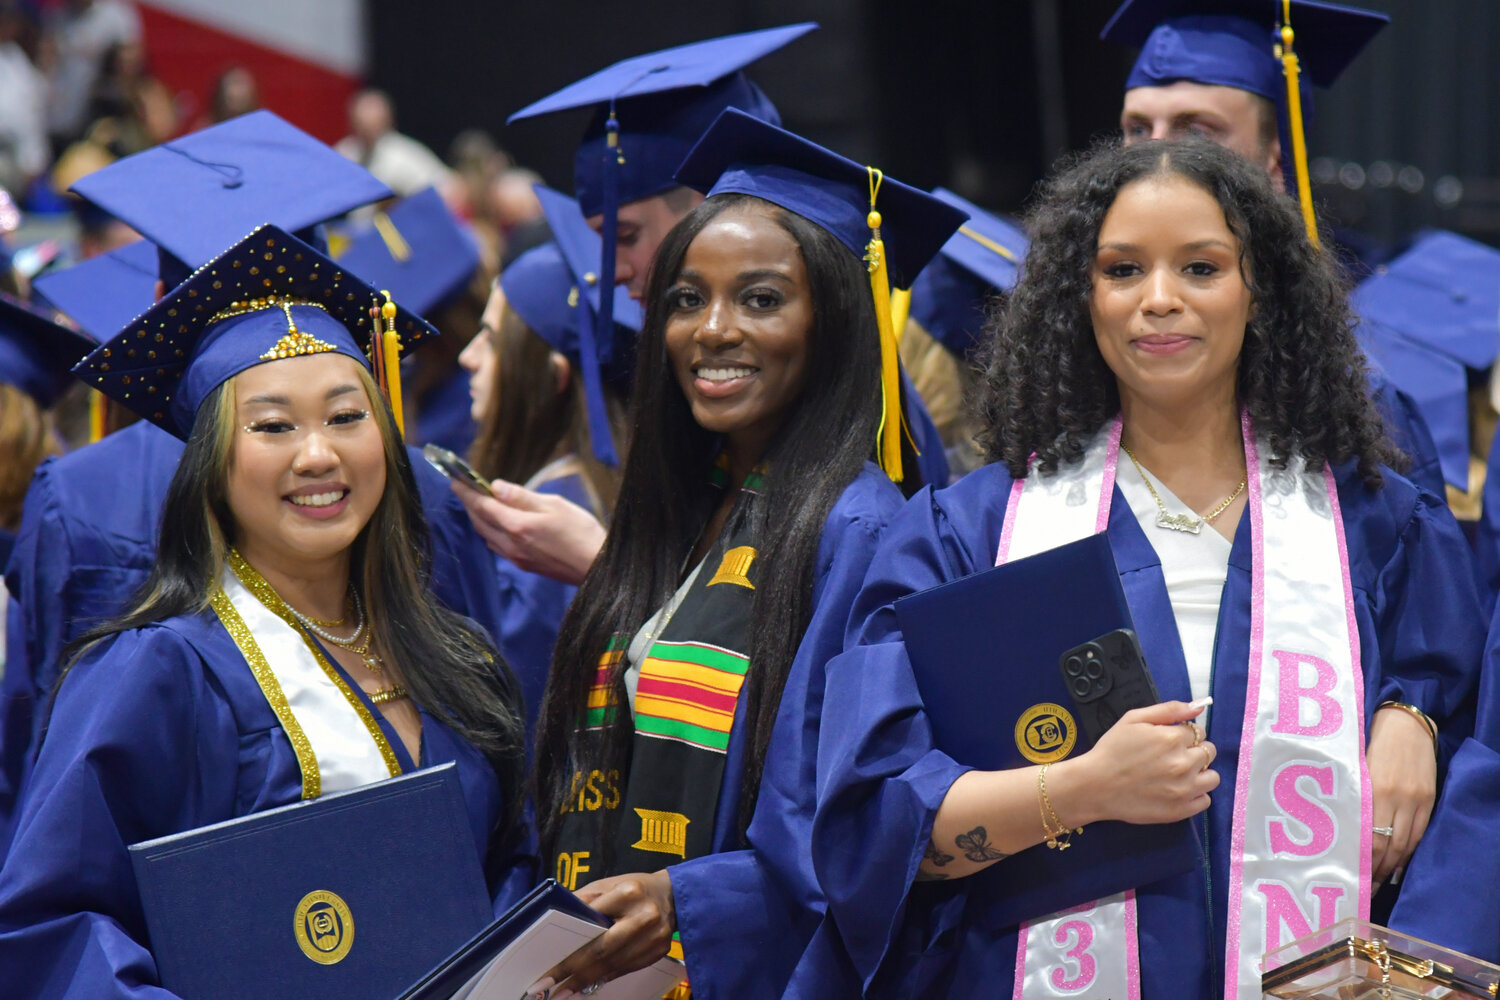 Utica University celebrated their 74th undergraduate commencement ceremony on Thursday, May 11, where the university honored 425  graduates at the Adirondack Bank Center at the Utica Memorial Auditorium.